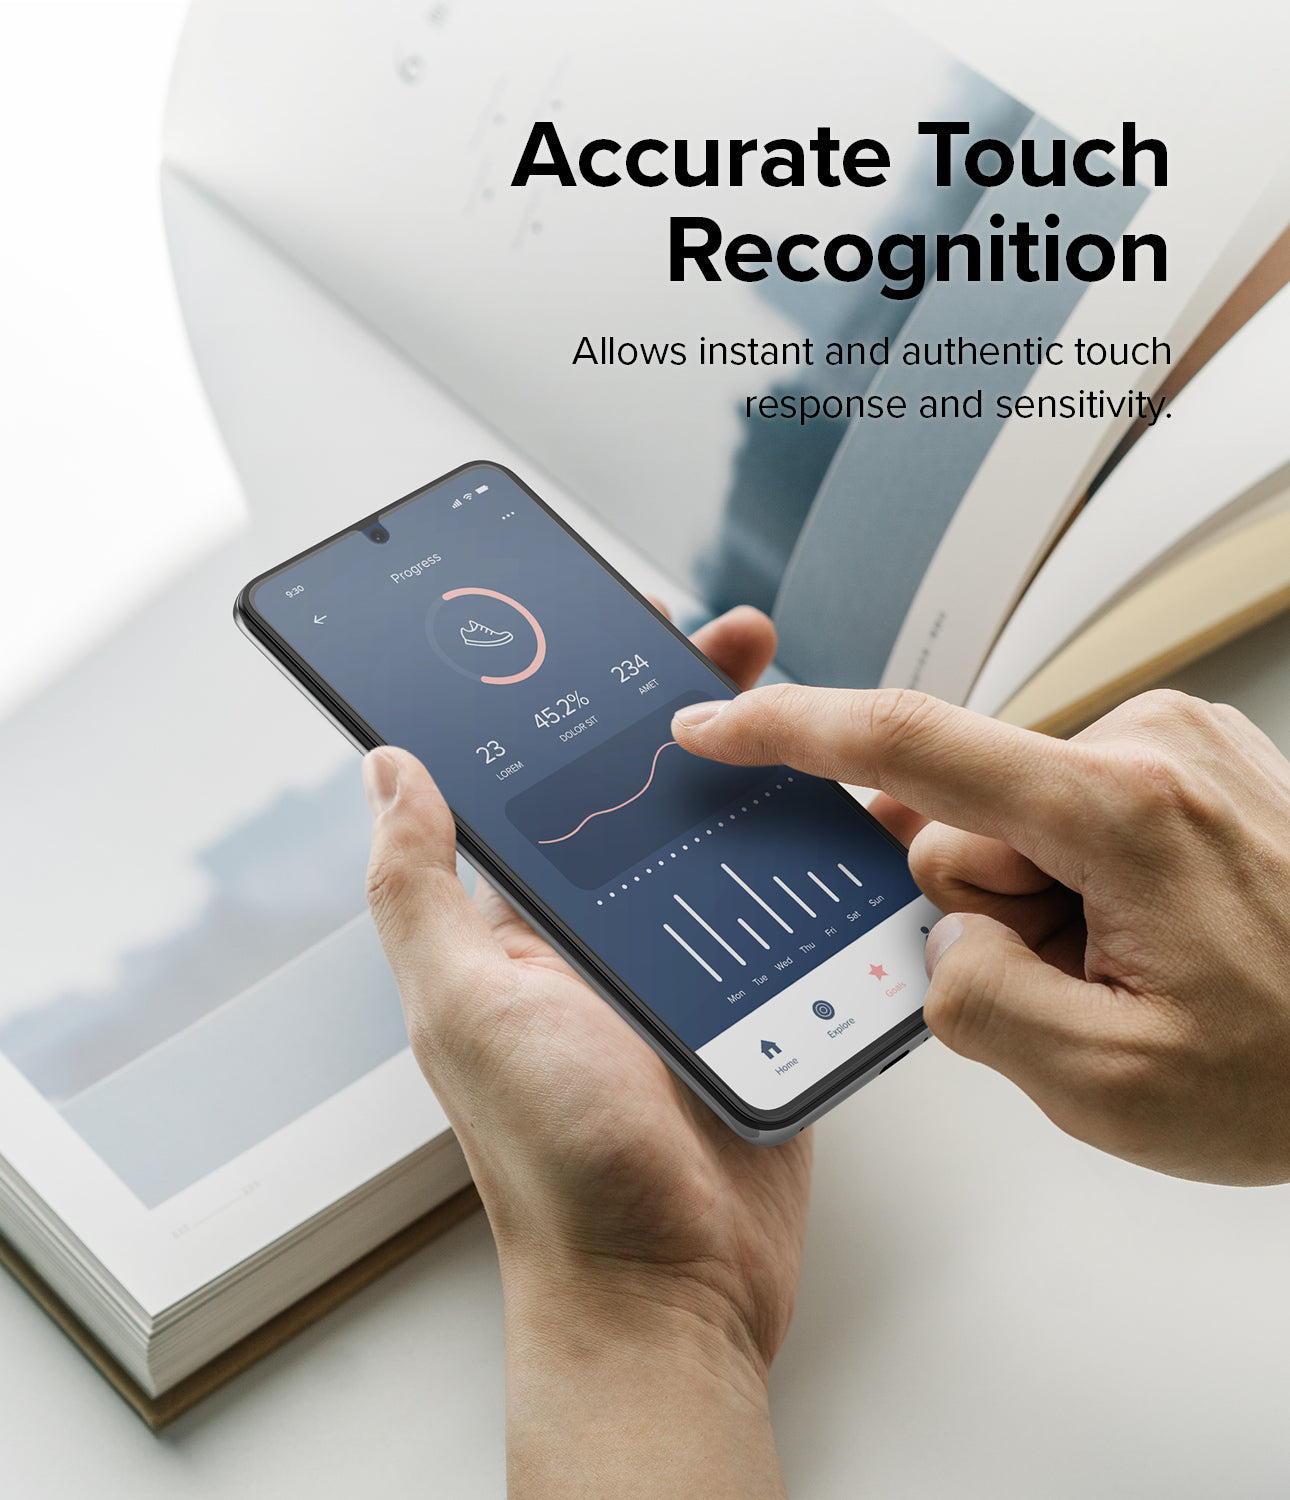 Accurate Touch Recognition - Allows instant and authentic touch response and sensitivity.